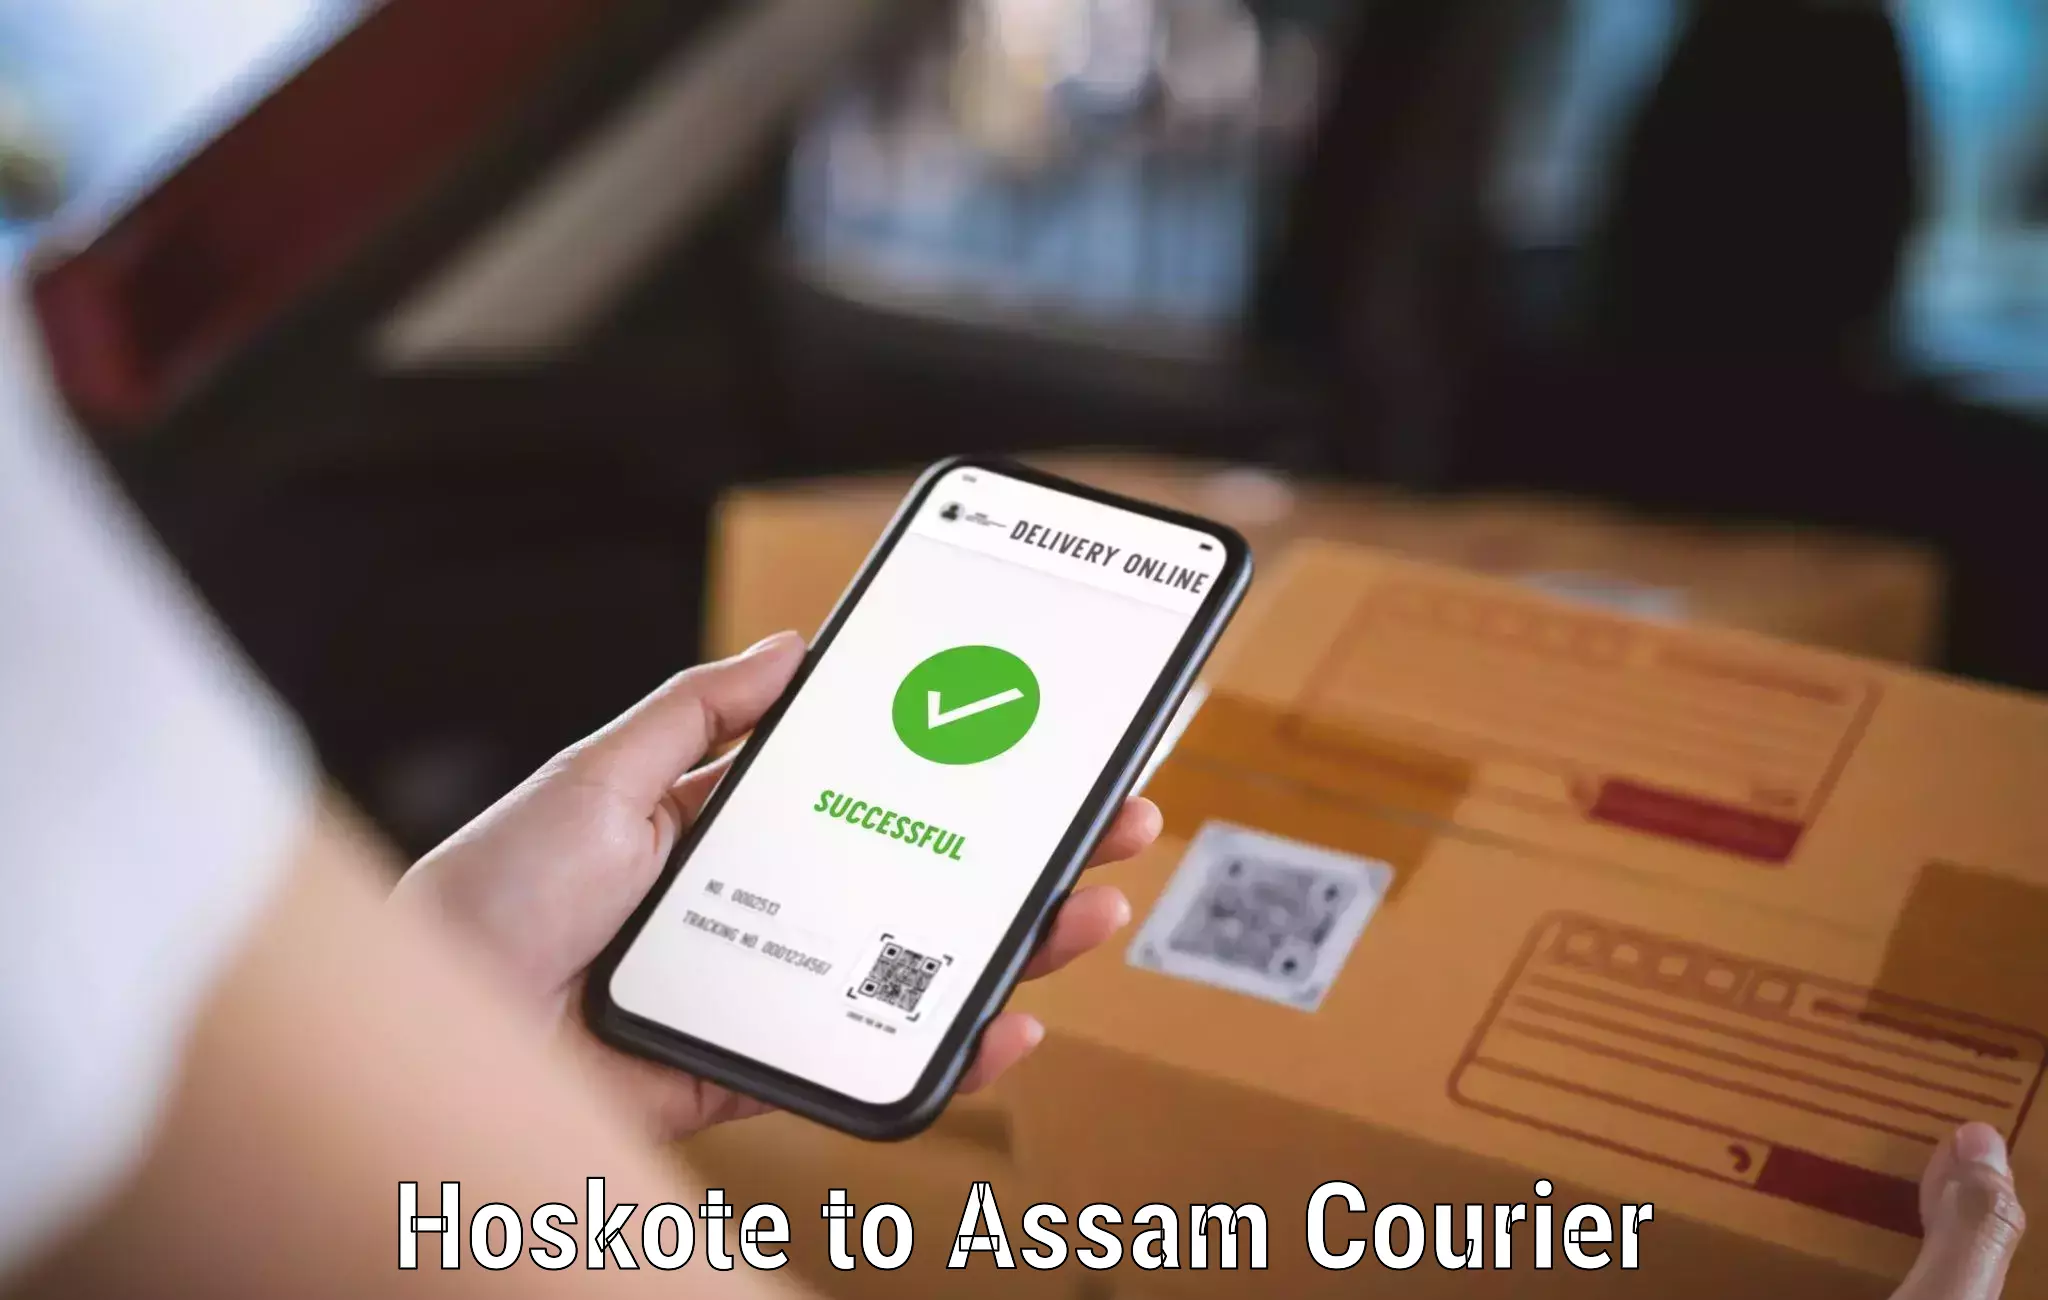 Local delivery service Hoskote to Assam